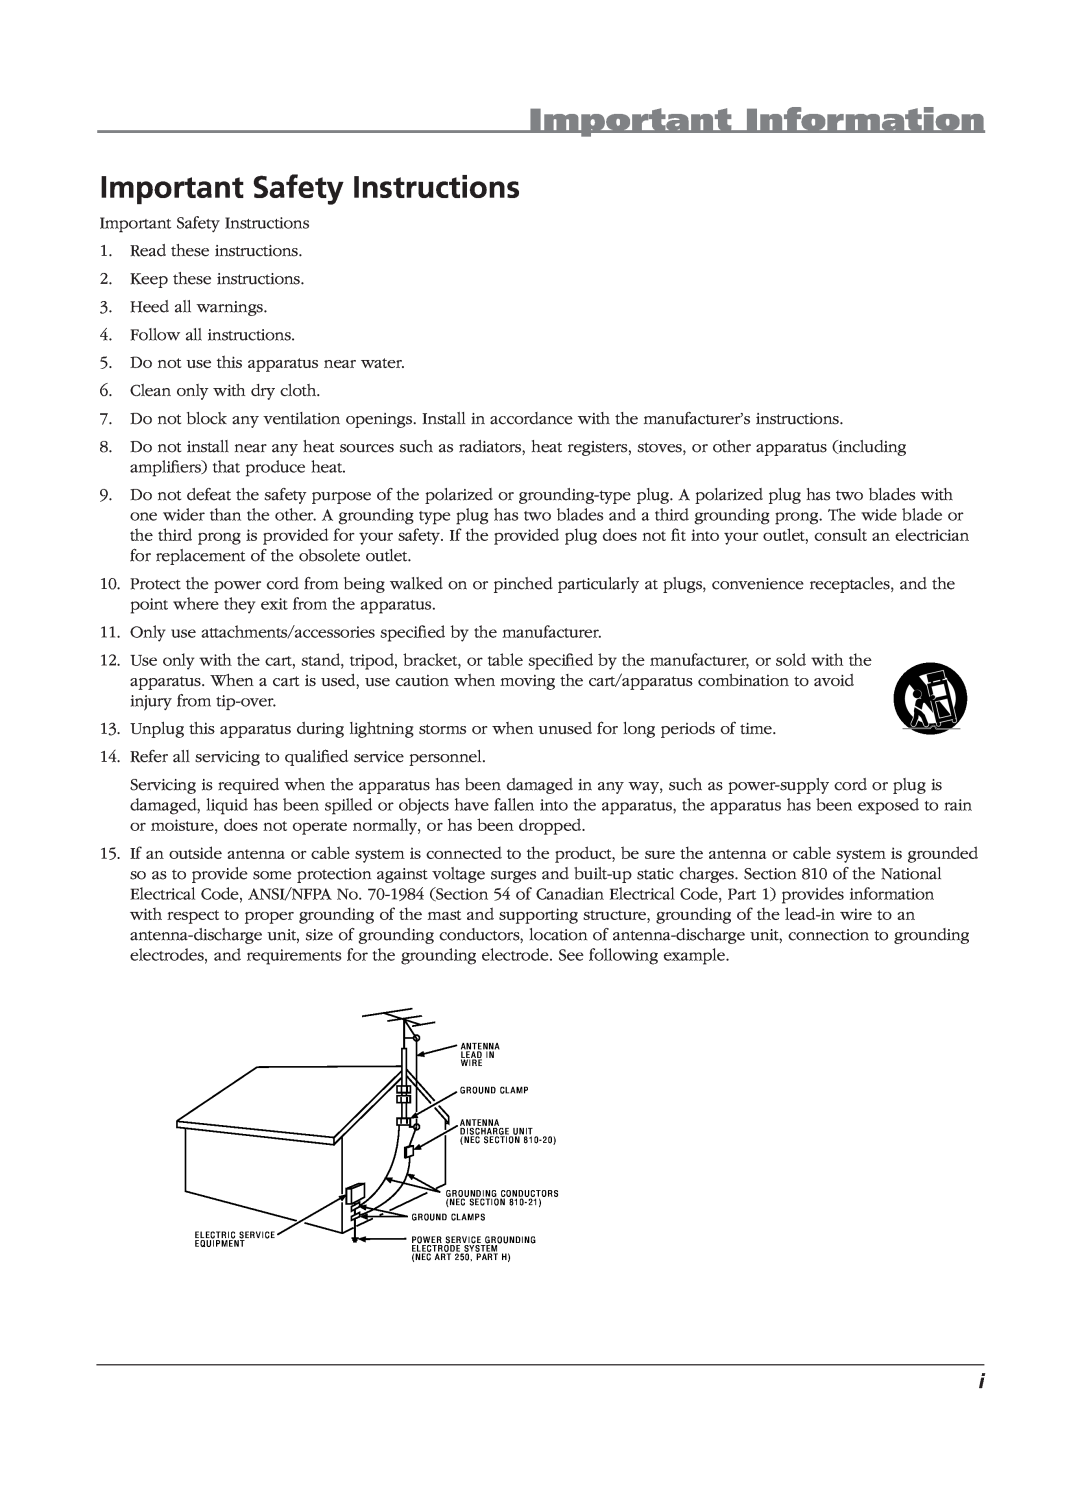 RCA L2010, L23W10, L1510 manual Important Safety Instructions, Important Information 